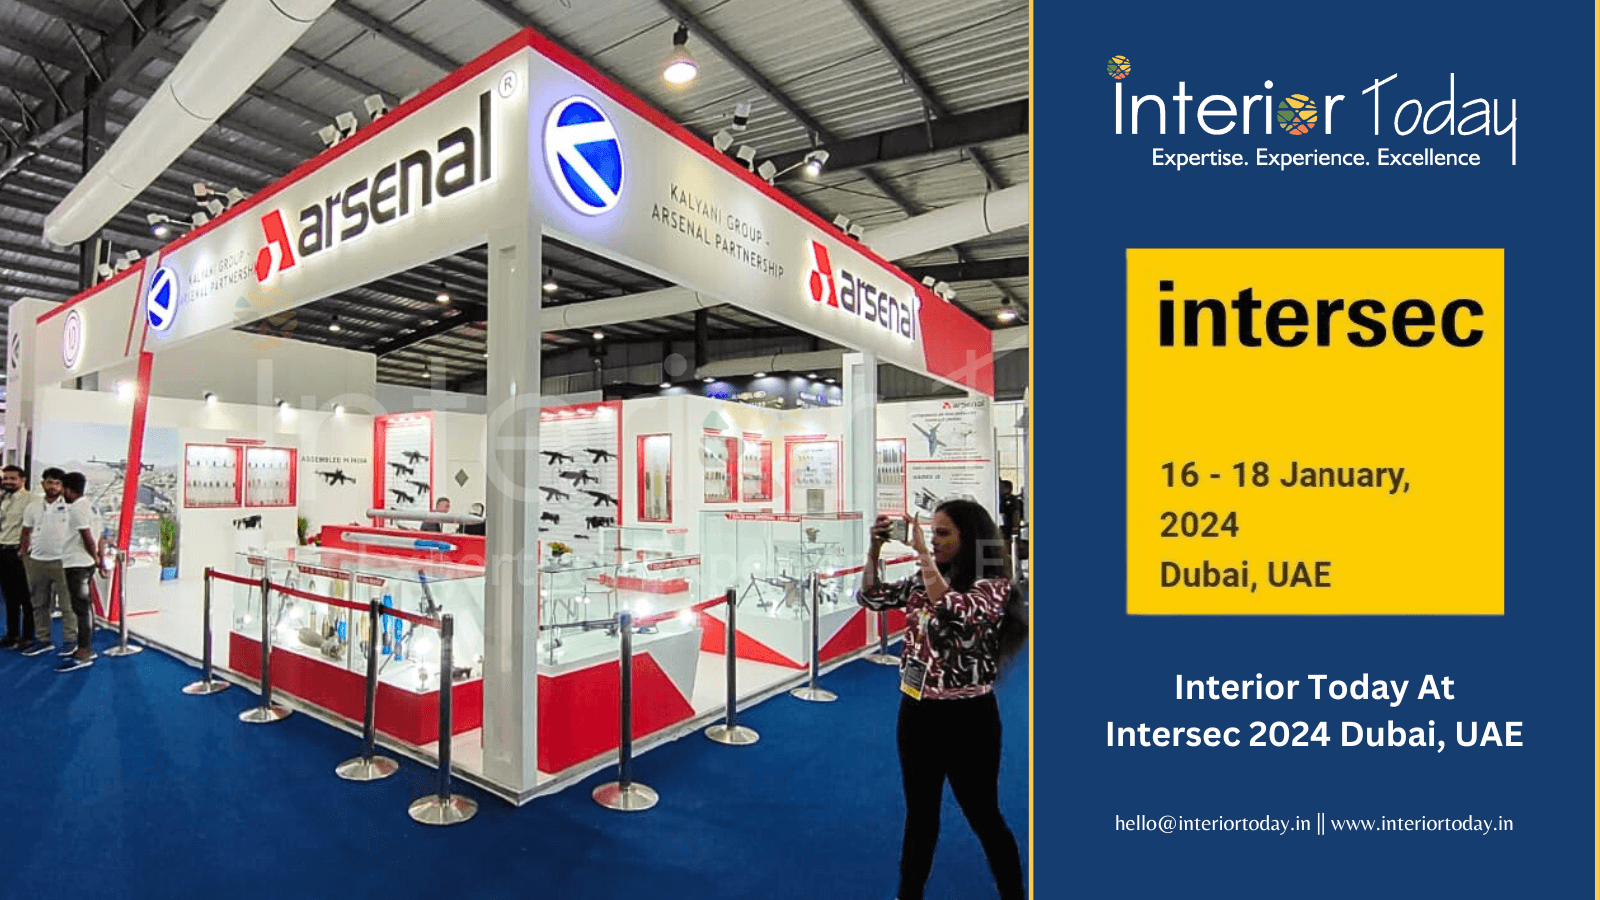 Interior Today is ready to design and deliver stands at intersec 2024